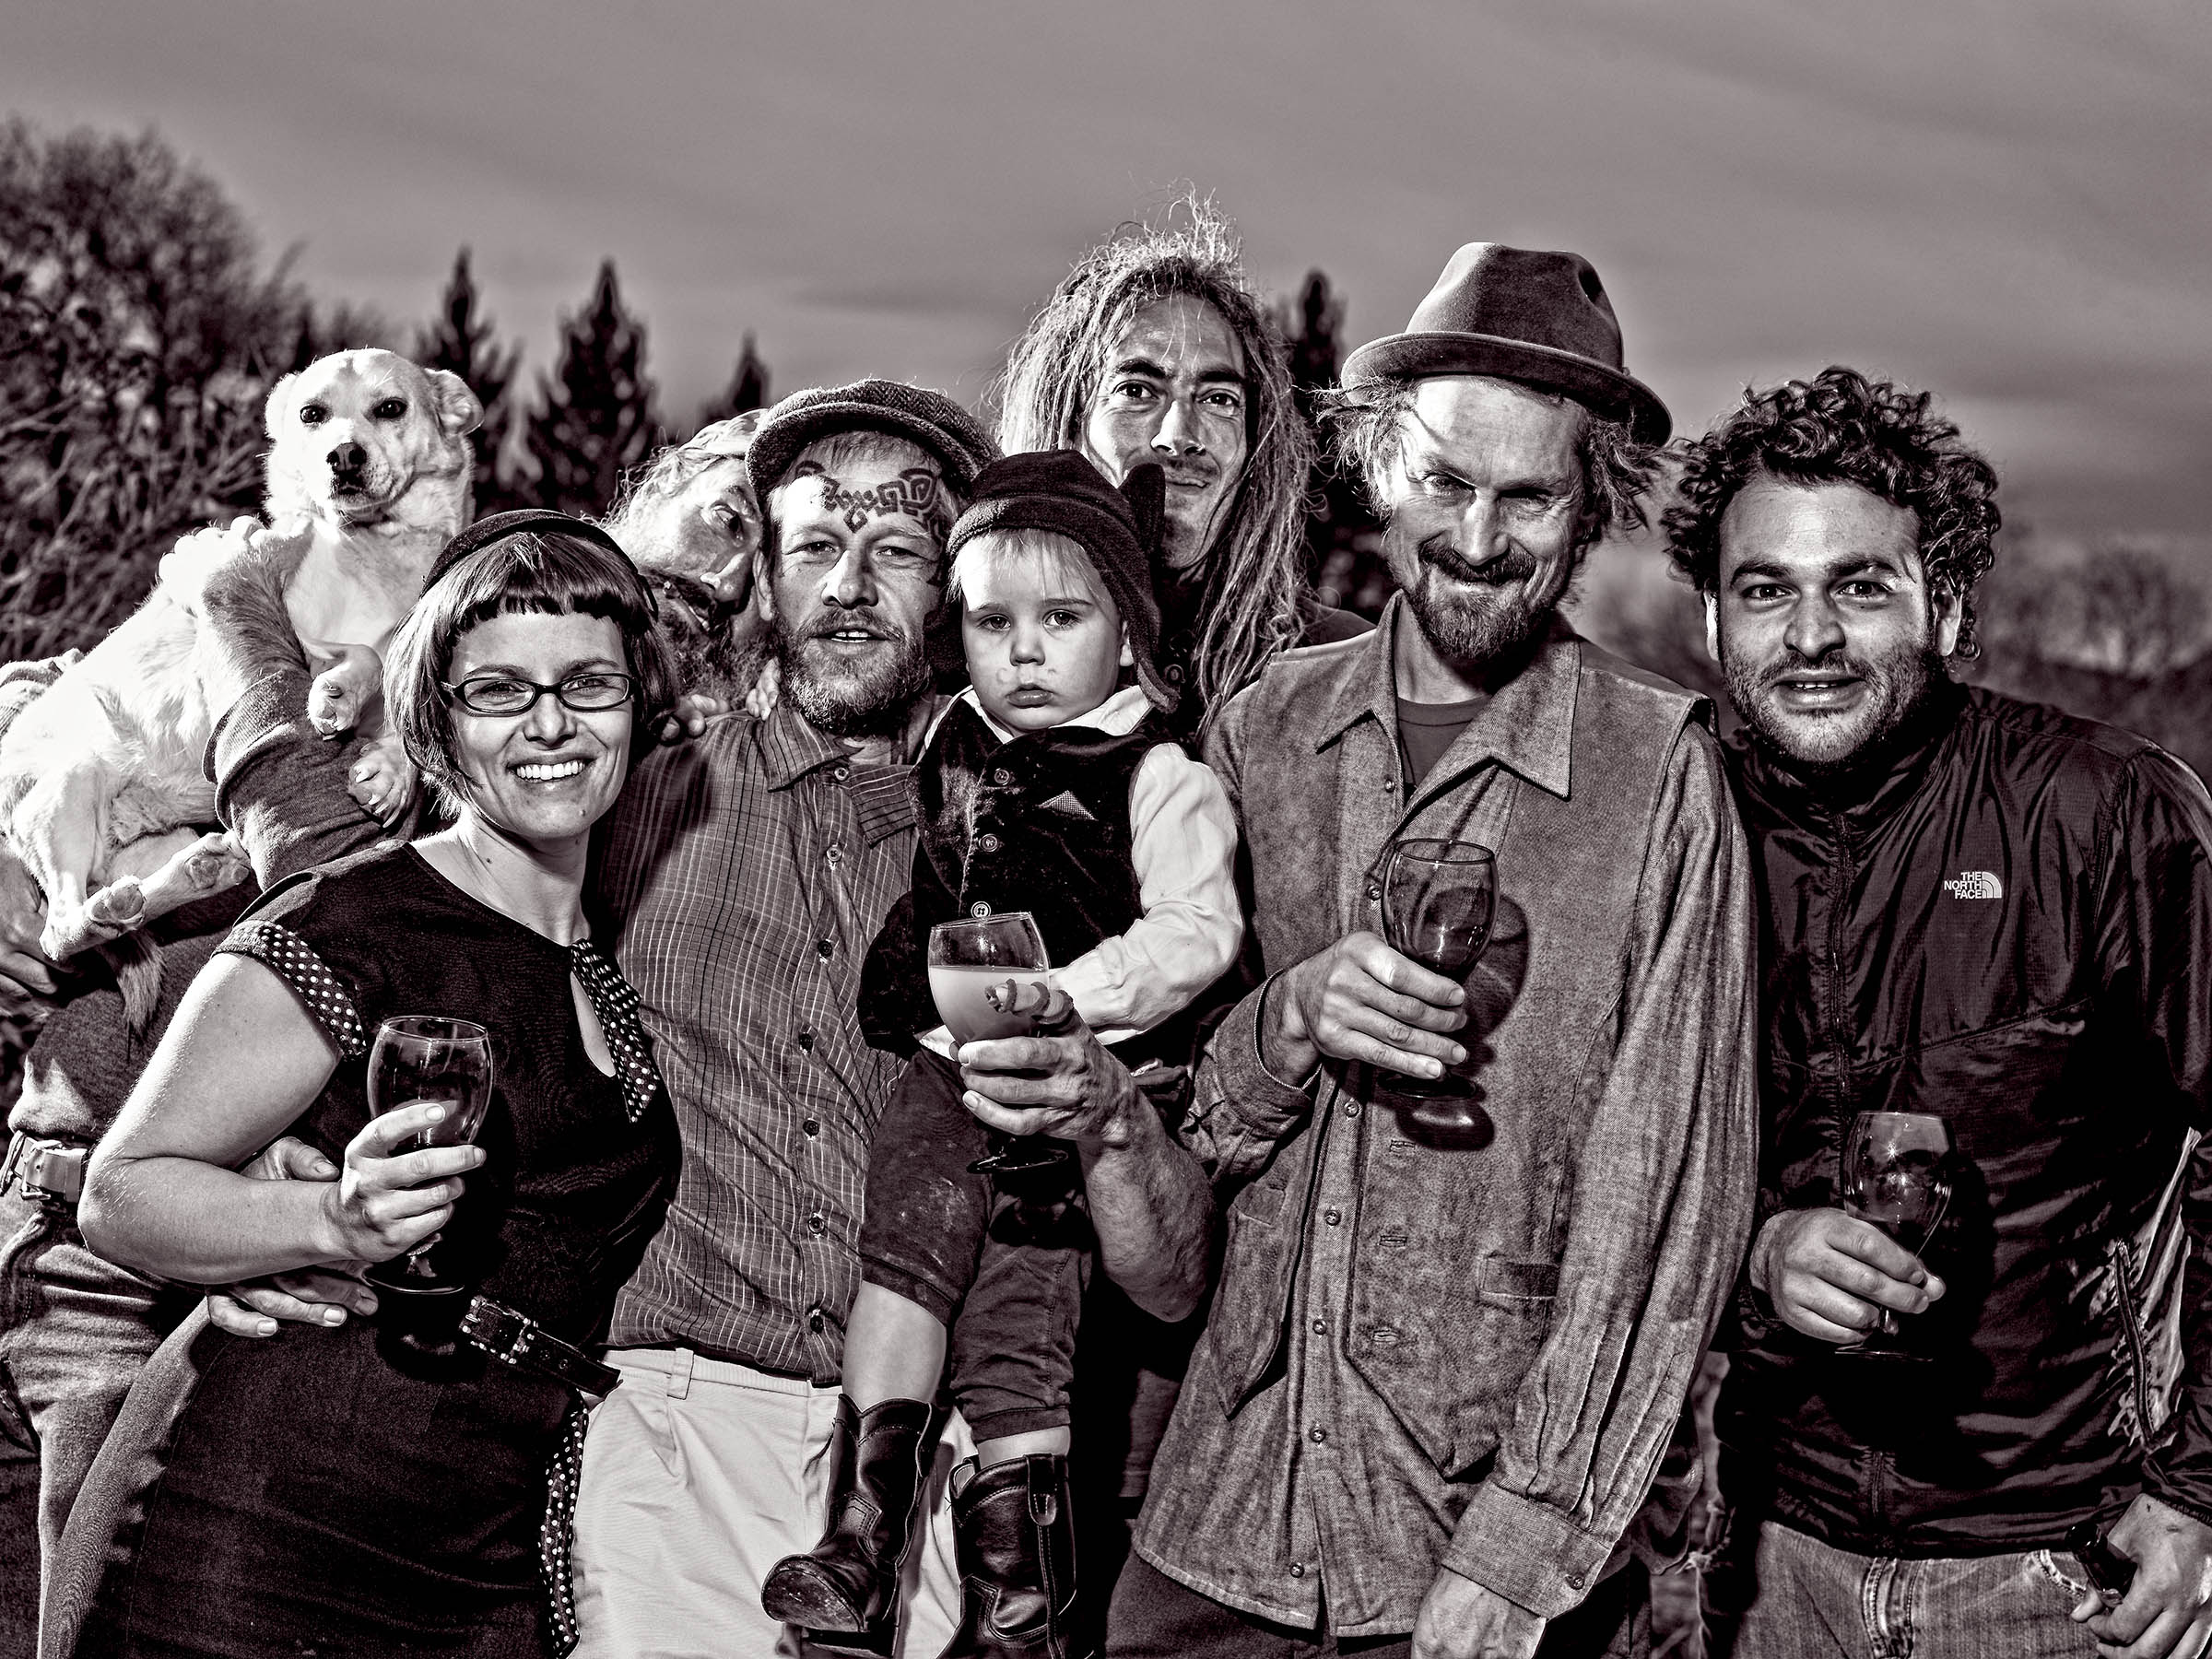 Thanksgiving in the Mimbres, NM, Wick Beavers Editorial lifestyle NYC Portraits